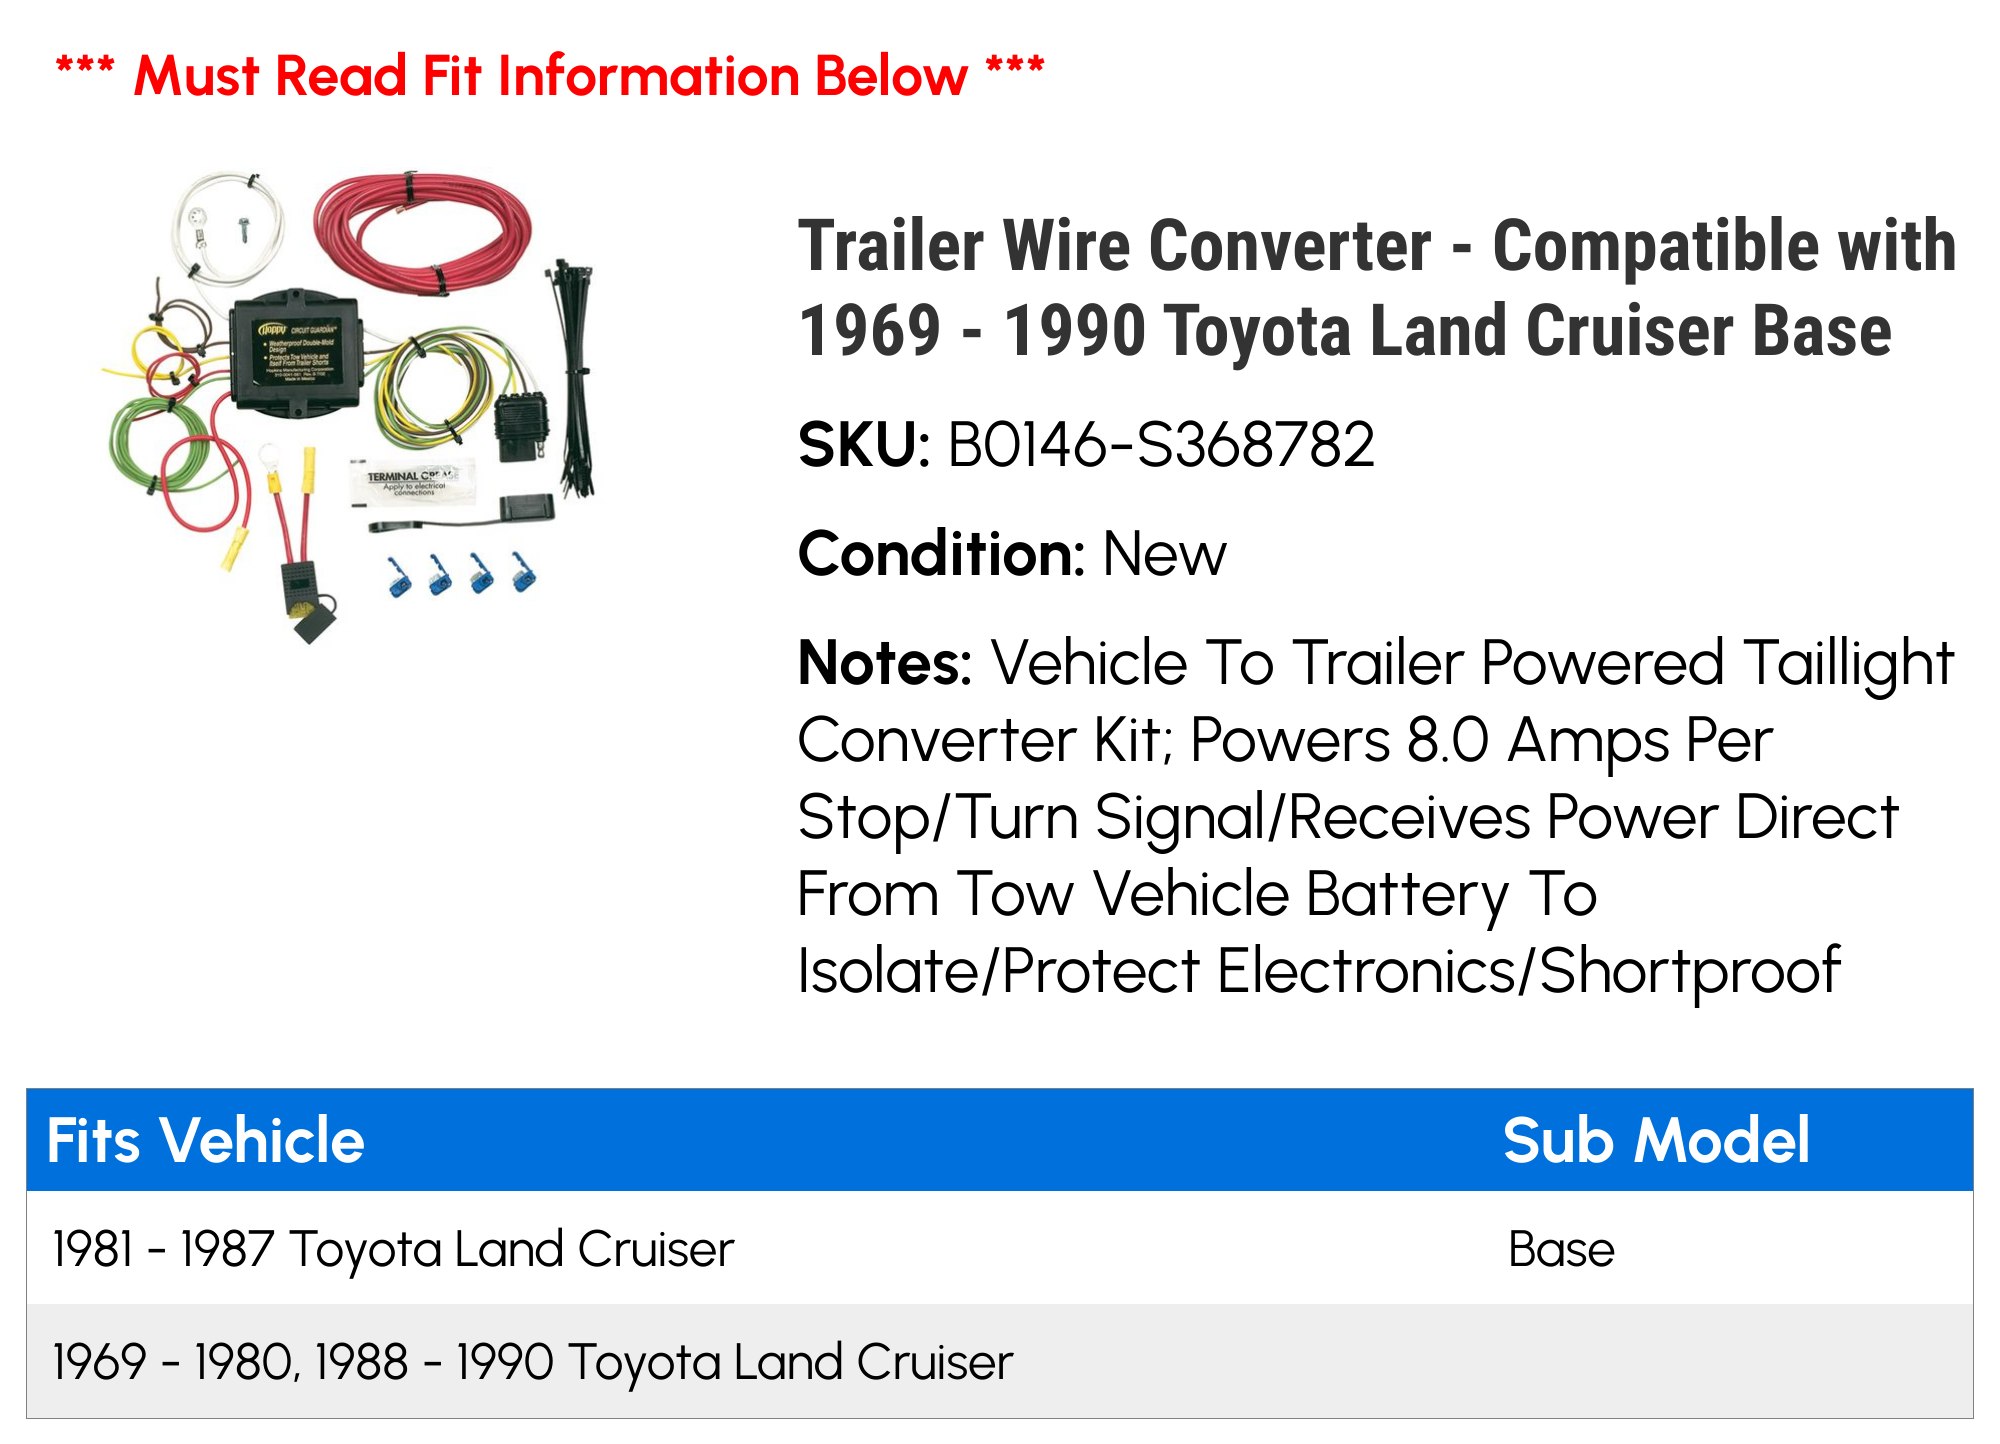 Trailer Wire Converter Compatible with 1969 1990 Toyota Land Cruiser  Base 1970 1971 1972 1973 1974 1975 1976 1977 1978 1979 1980 1981 1982 1983  1984 1985 1986 1987 1988 1989